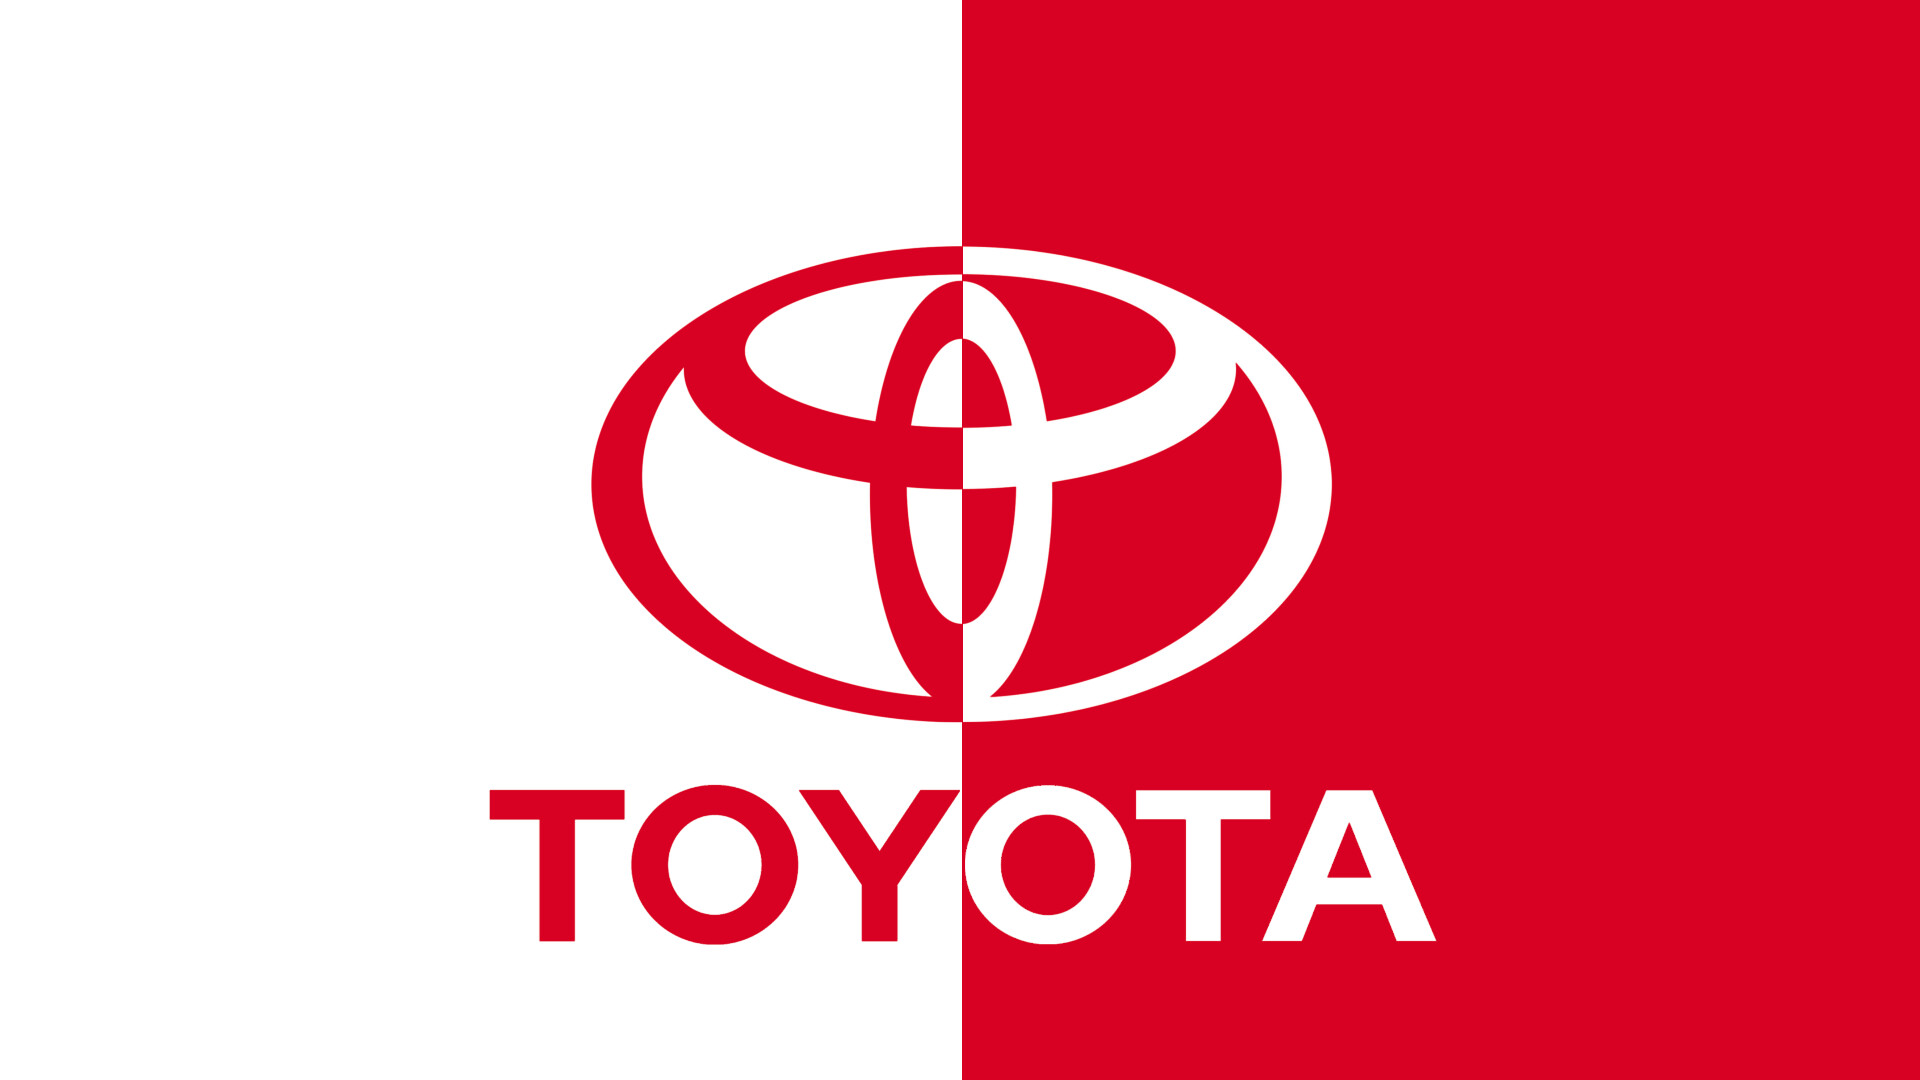 Toyota: The current logo, introduced in 1989 to mark the company's 50th year as a global carmaker. 1920x1080 Full HD Background.